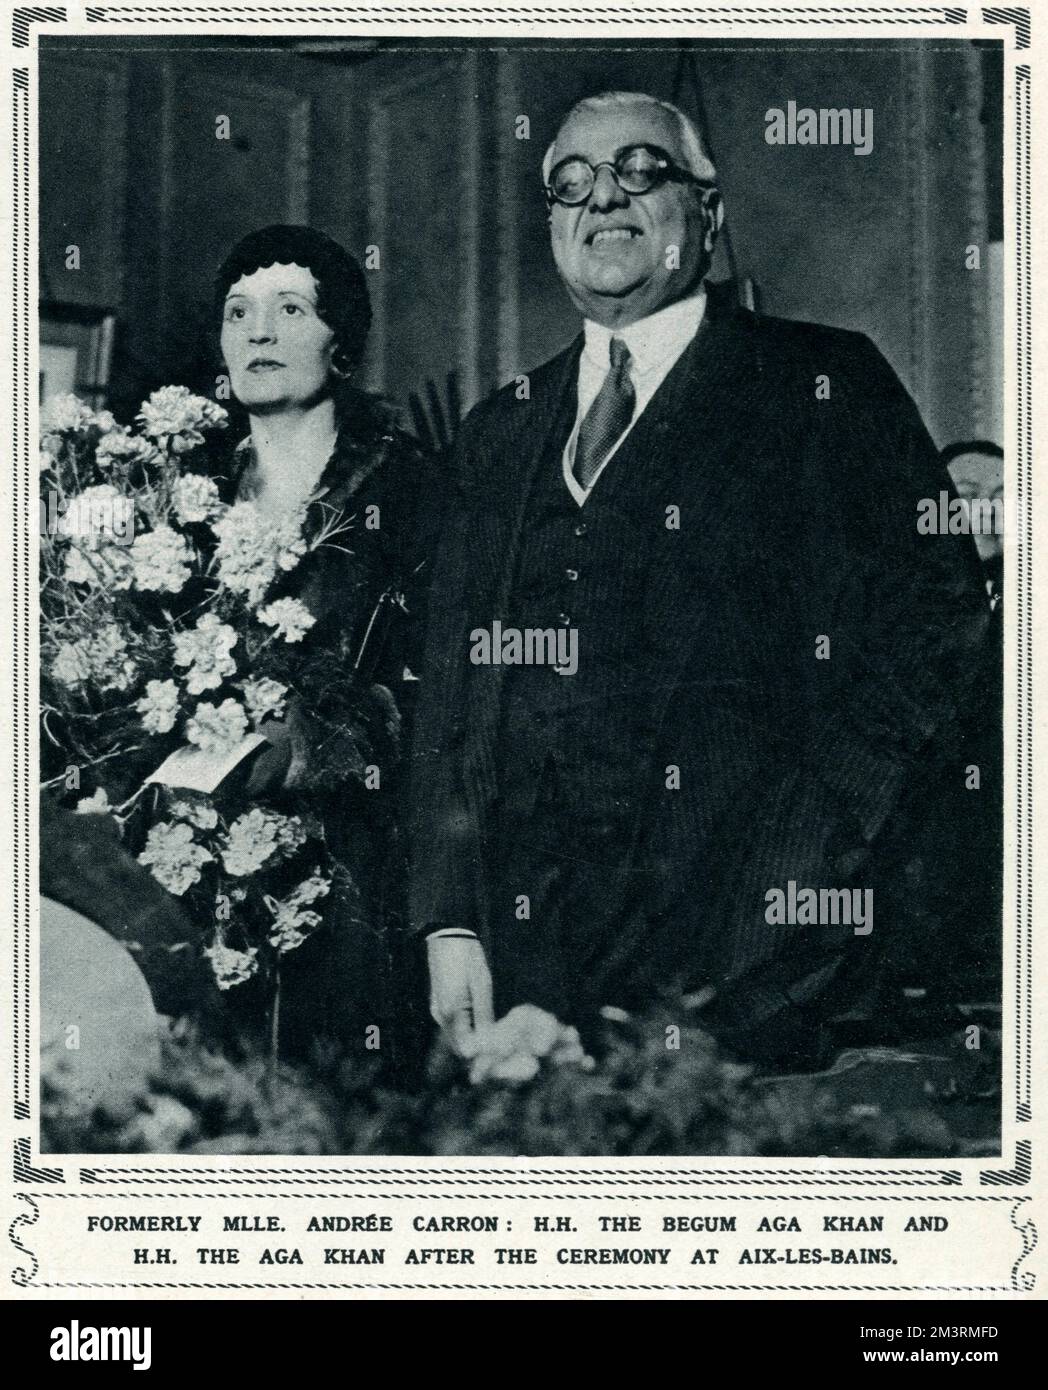 Aga Khan III (Sir Sultan Mohammed Shah, 1877-1957), Indian Muslim leader, racing enthusiast and prominent society figure, marrying his third wife, Mlle Andree Carron at Aix-les-Bains in December 1929.     Date: 1929 Stock Photo